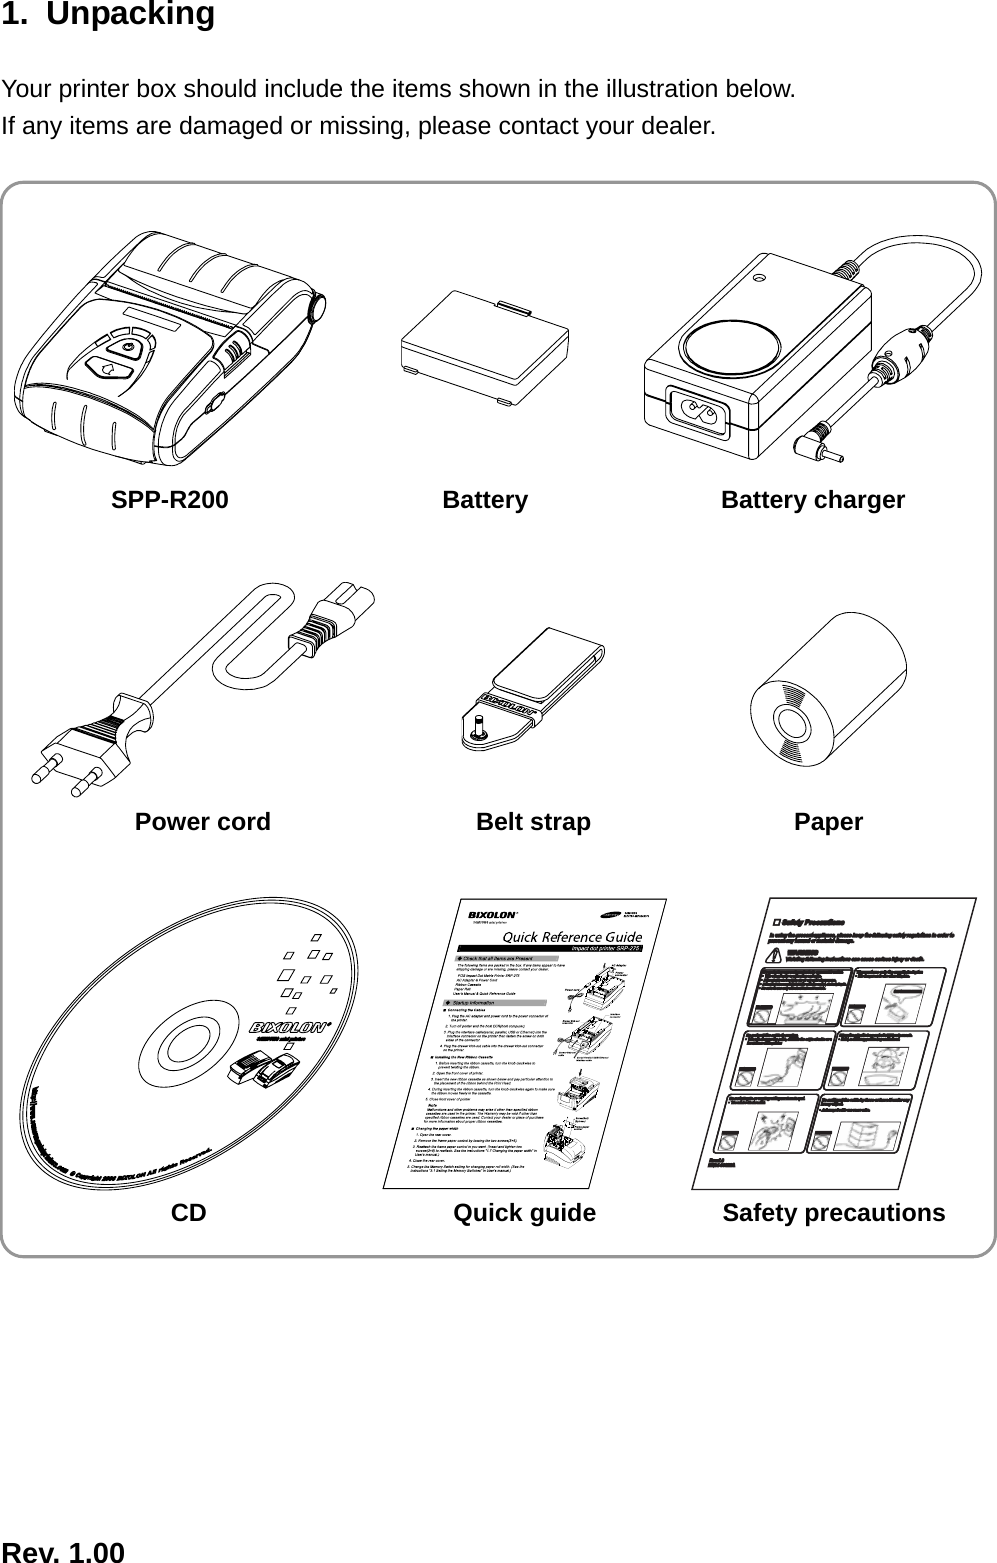  Rev. 1.00  1. Unpacking  Your printer box should include the items shown in the illustration below. If any items are damaged or missing, please contact your dealer.       SPP-R200 Battery Battery charger      Power cord  Belt strap  Paper                                                                                                                                                                  CD  Quick guide  Safety precautions 